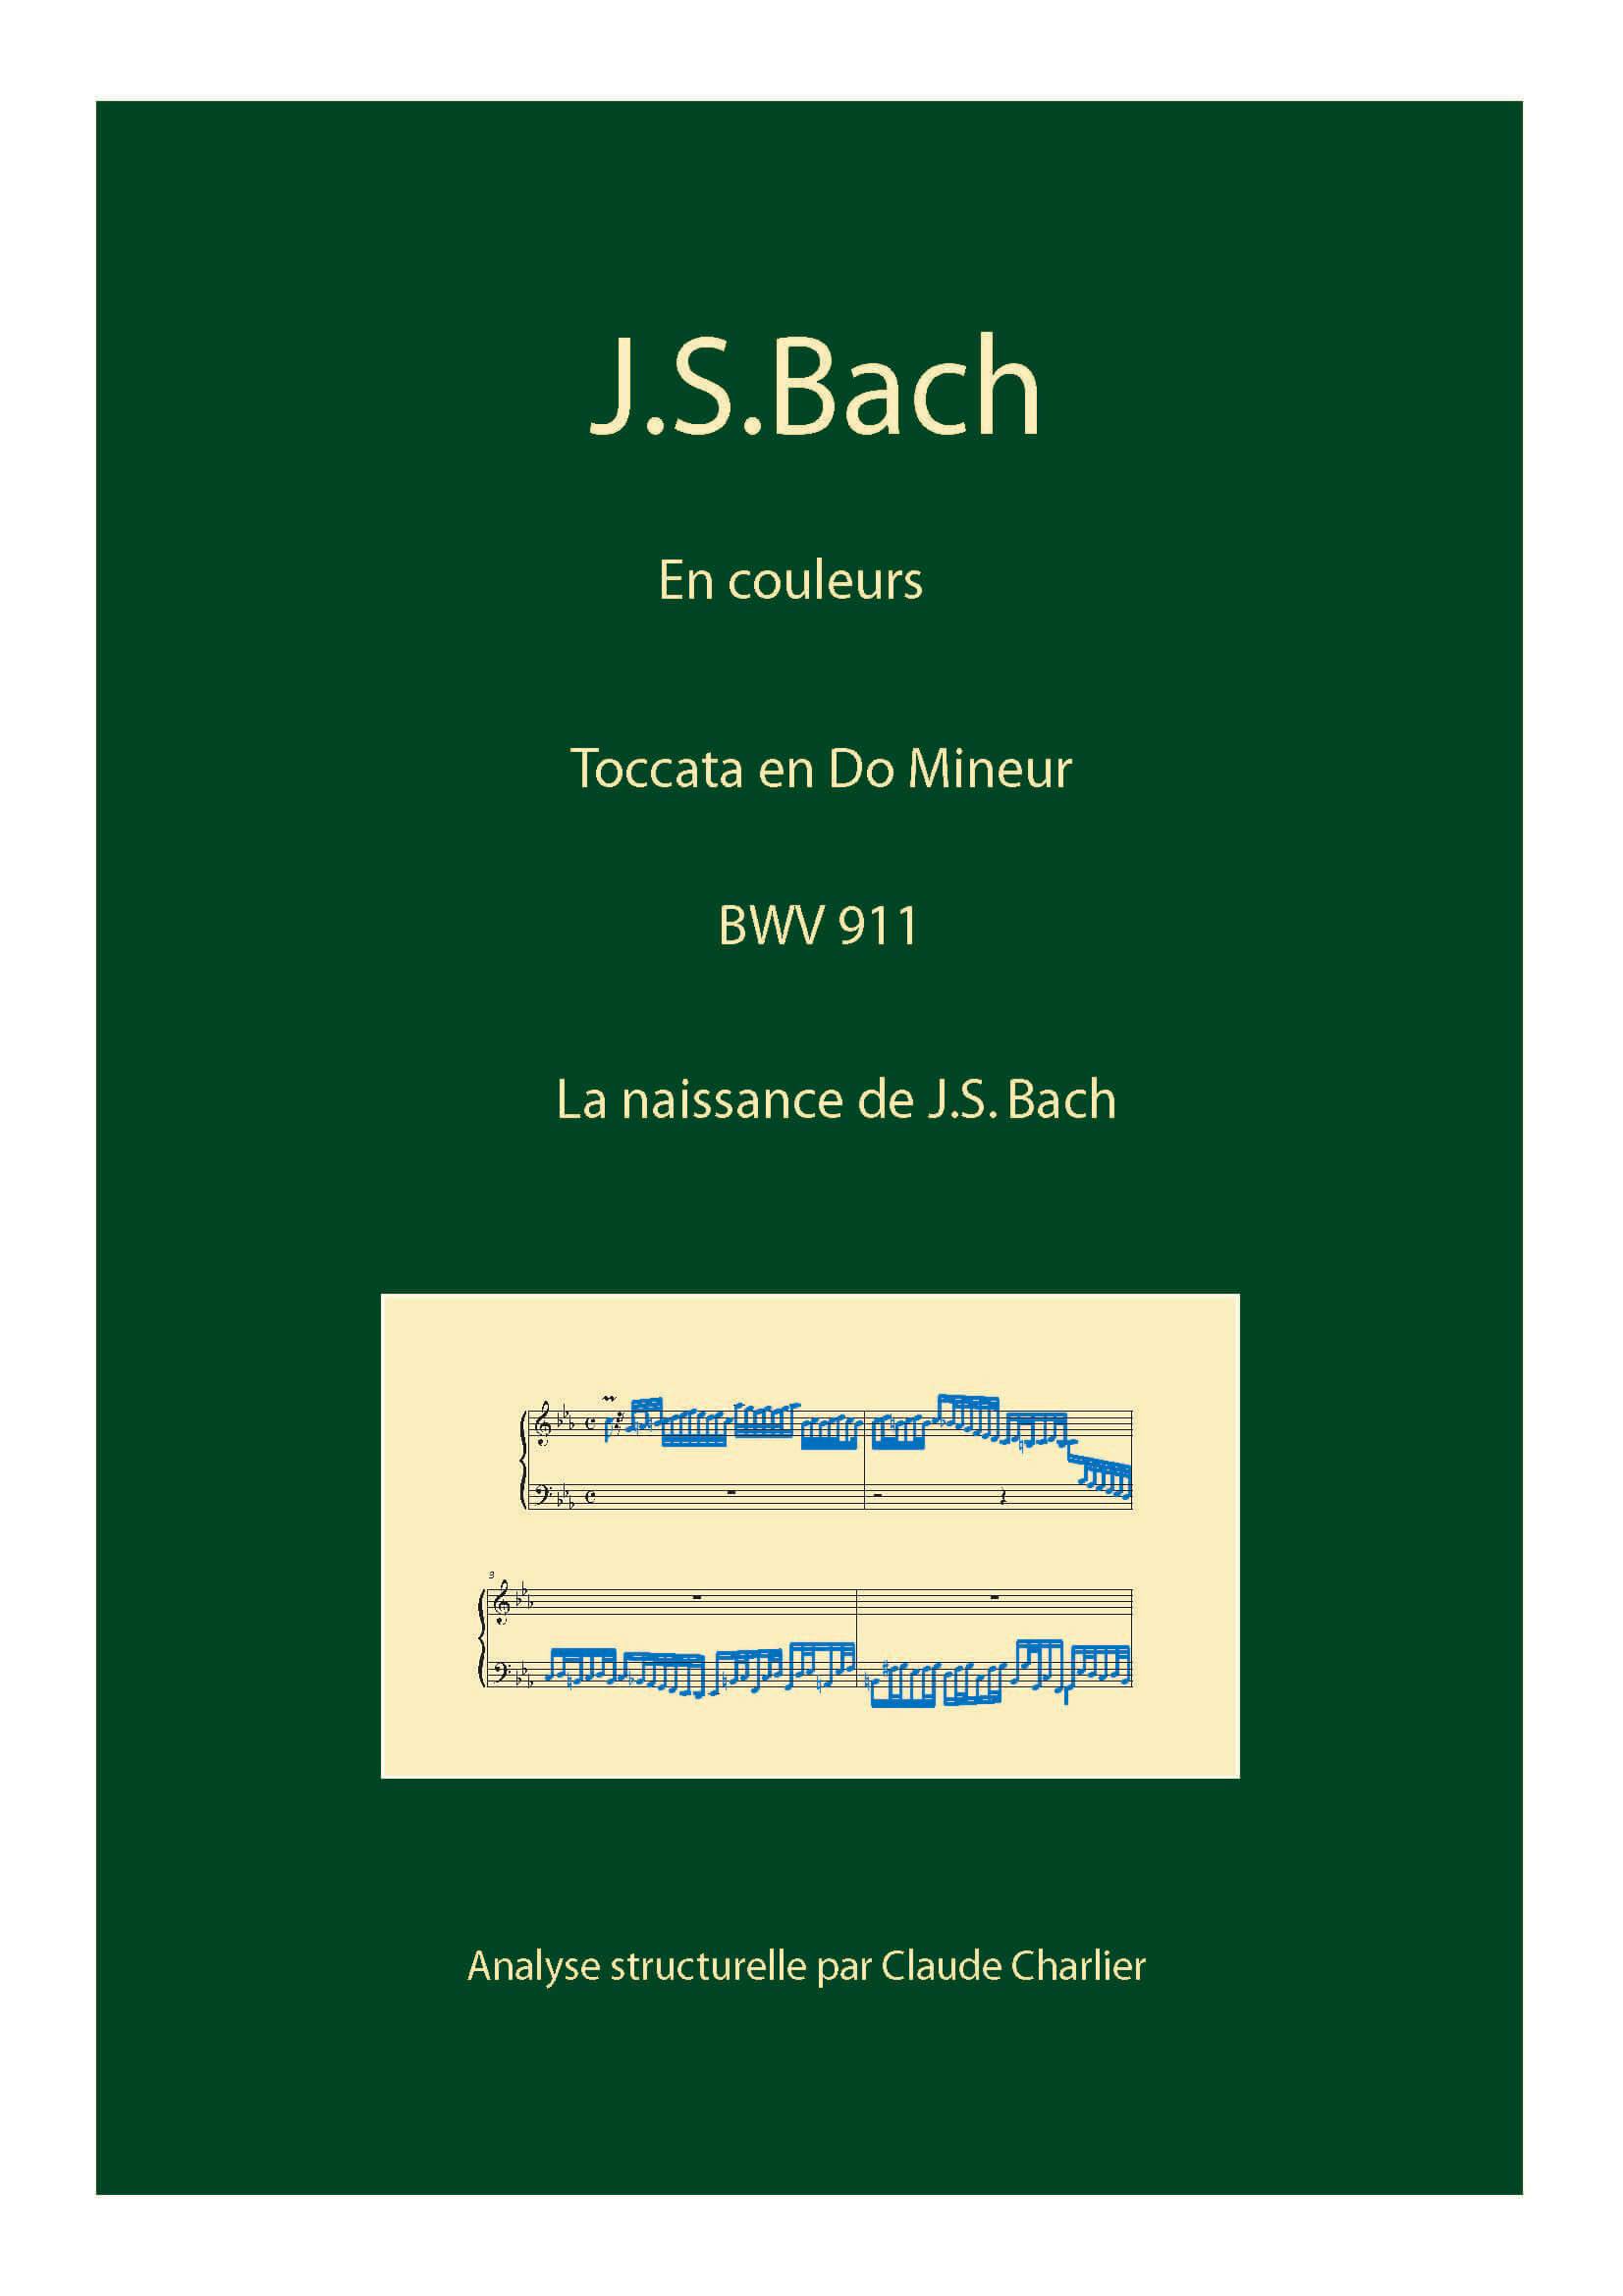 Toccata BWV 911 - Analyse Musicale - CHARLIER C. - front page